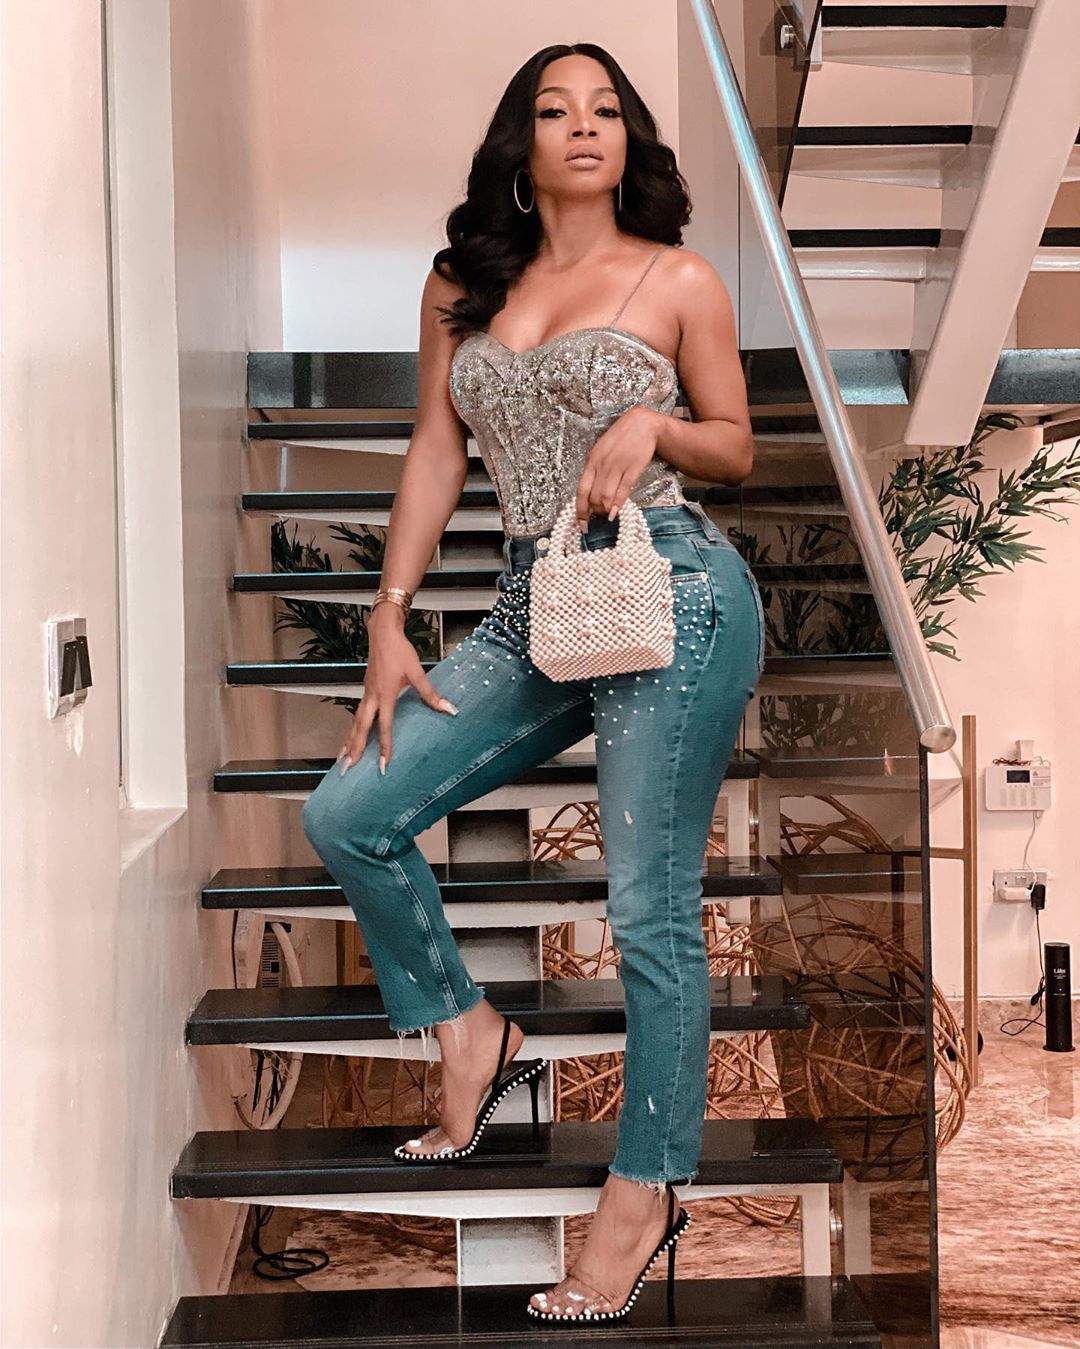 "African parents are the world's worst; they ruined our lives" - Toke Makinwa